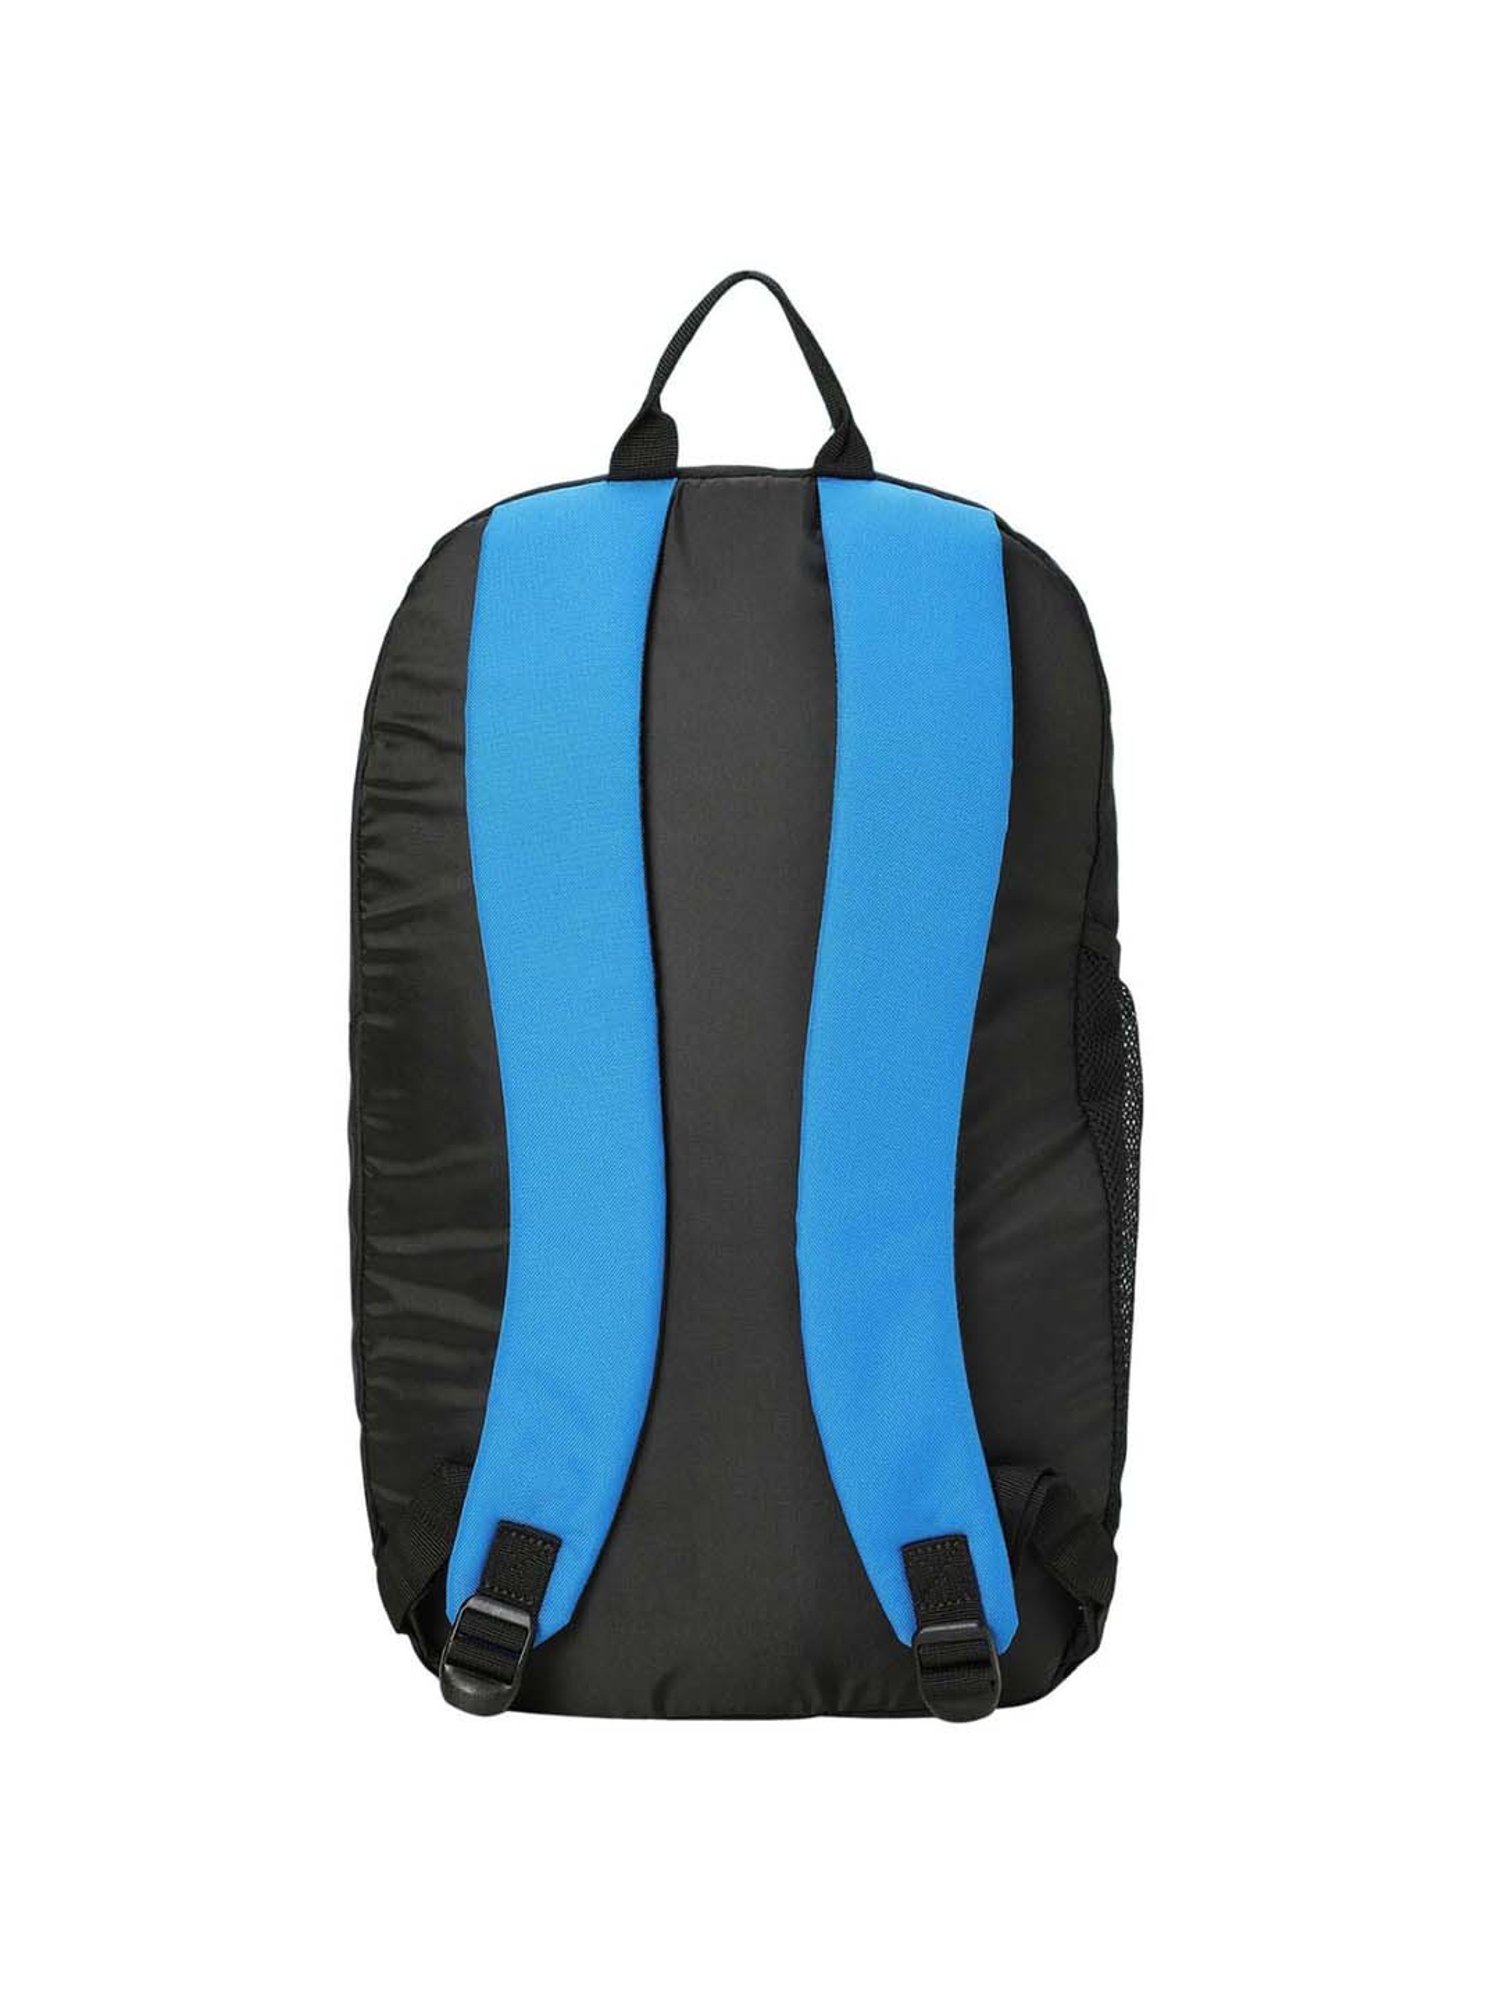 Buy NewFeel Abeona 14L Bag (Blue) Online at Low Prices in India - Amazon.in